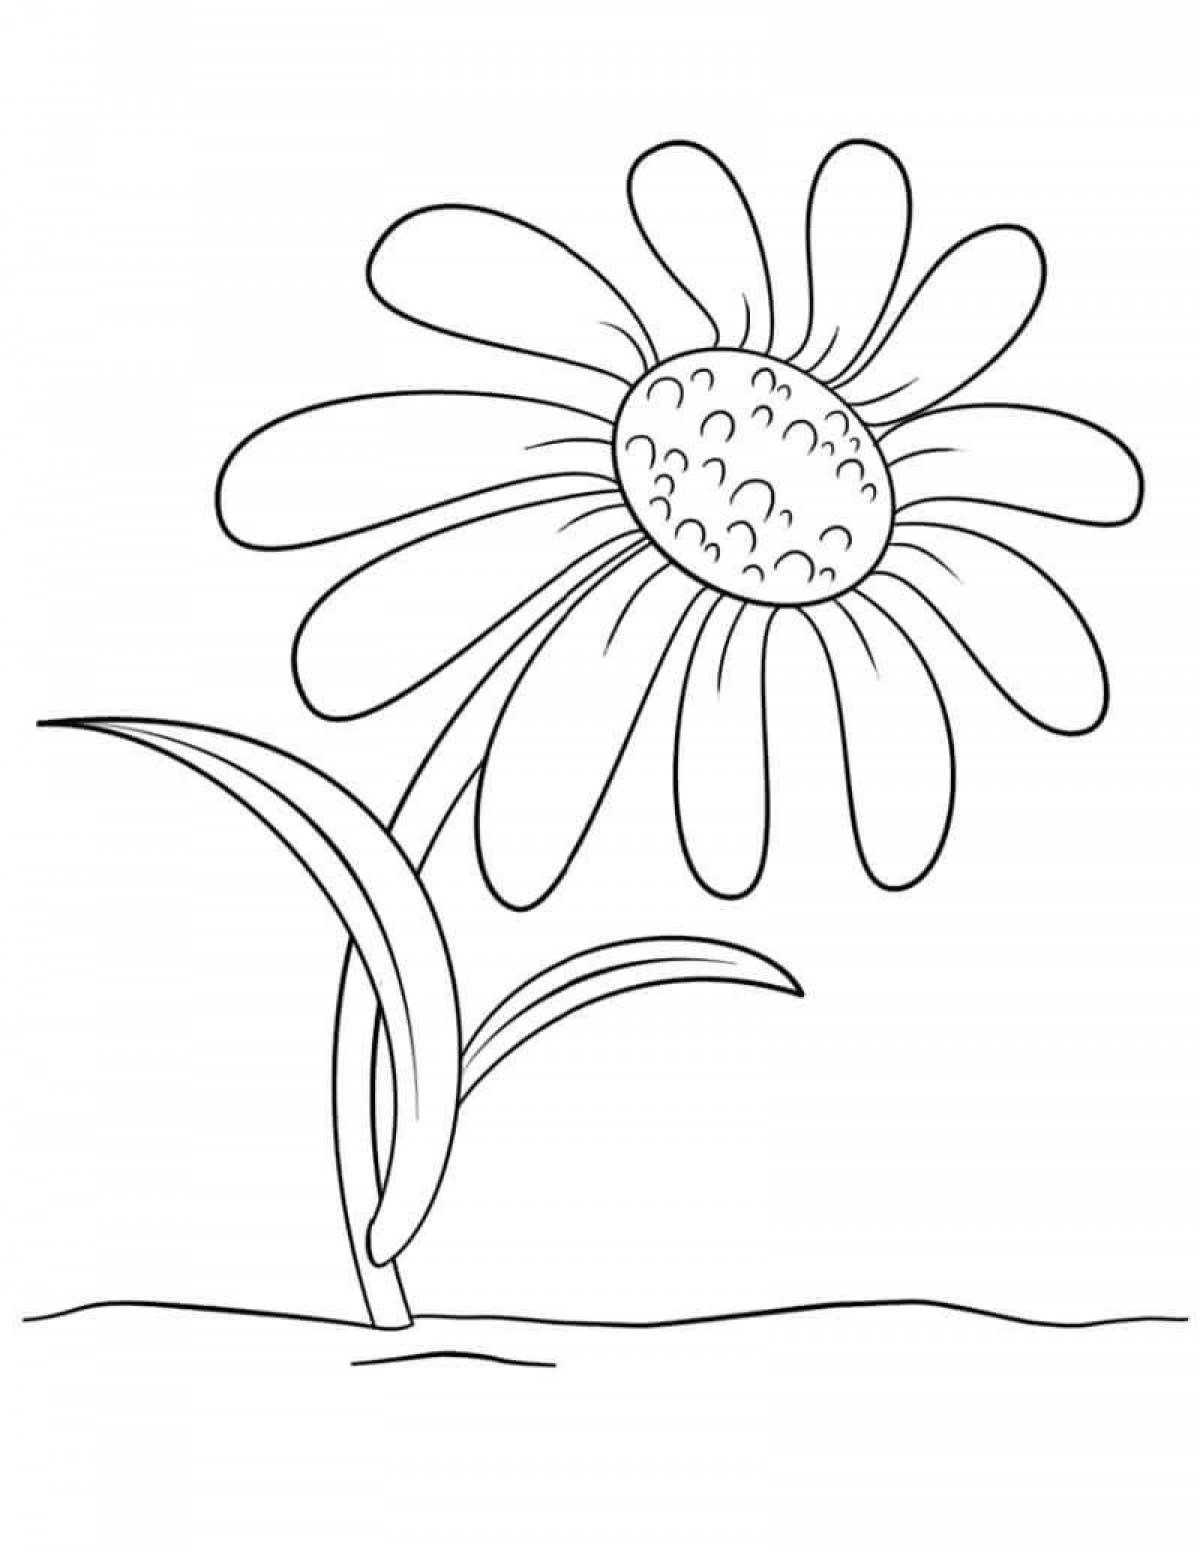 Coloring book cheerful drawing of chamomile